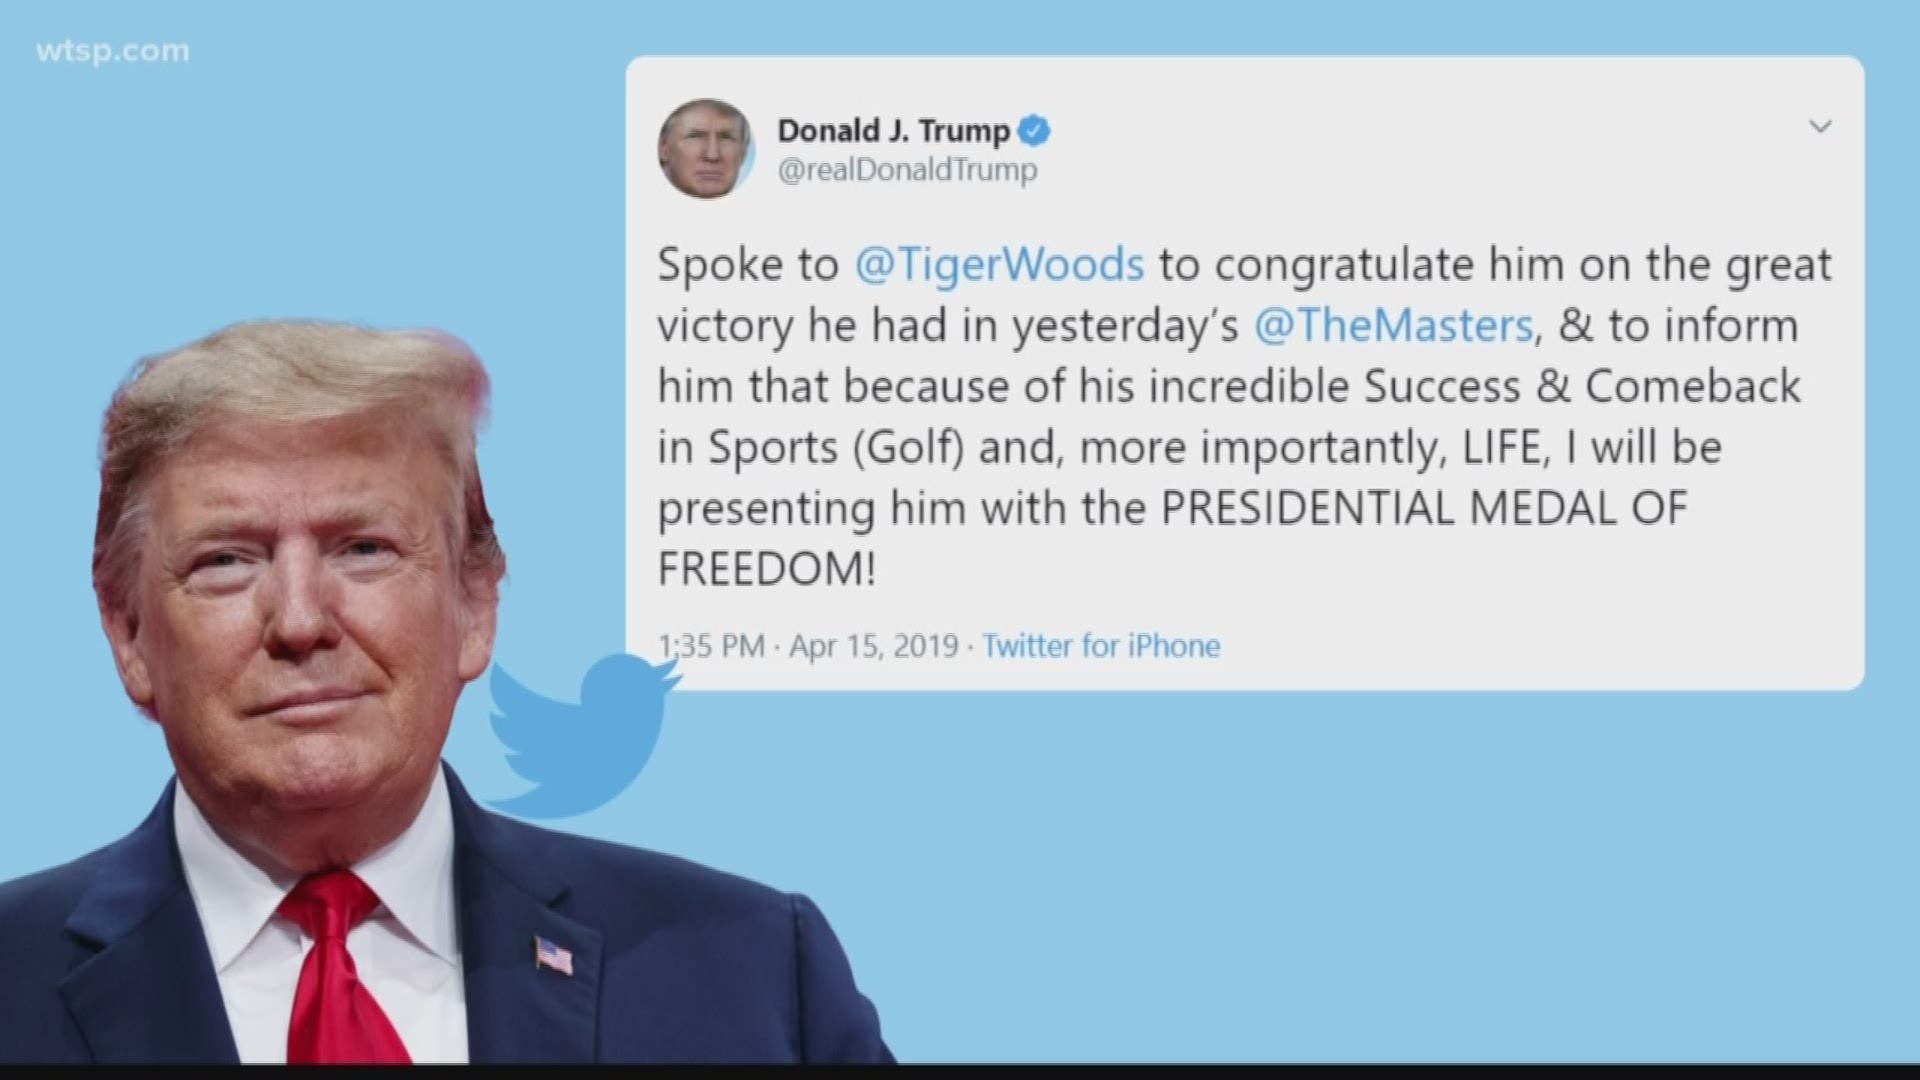 U.S. presidents have awarded the Presidential Medal of Freedom to several athletes over the years. On Monday, President Trump awarded the nation's highest civilian honor to Tiger Woods. https://on.wtsp.com/2vKxV62